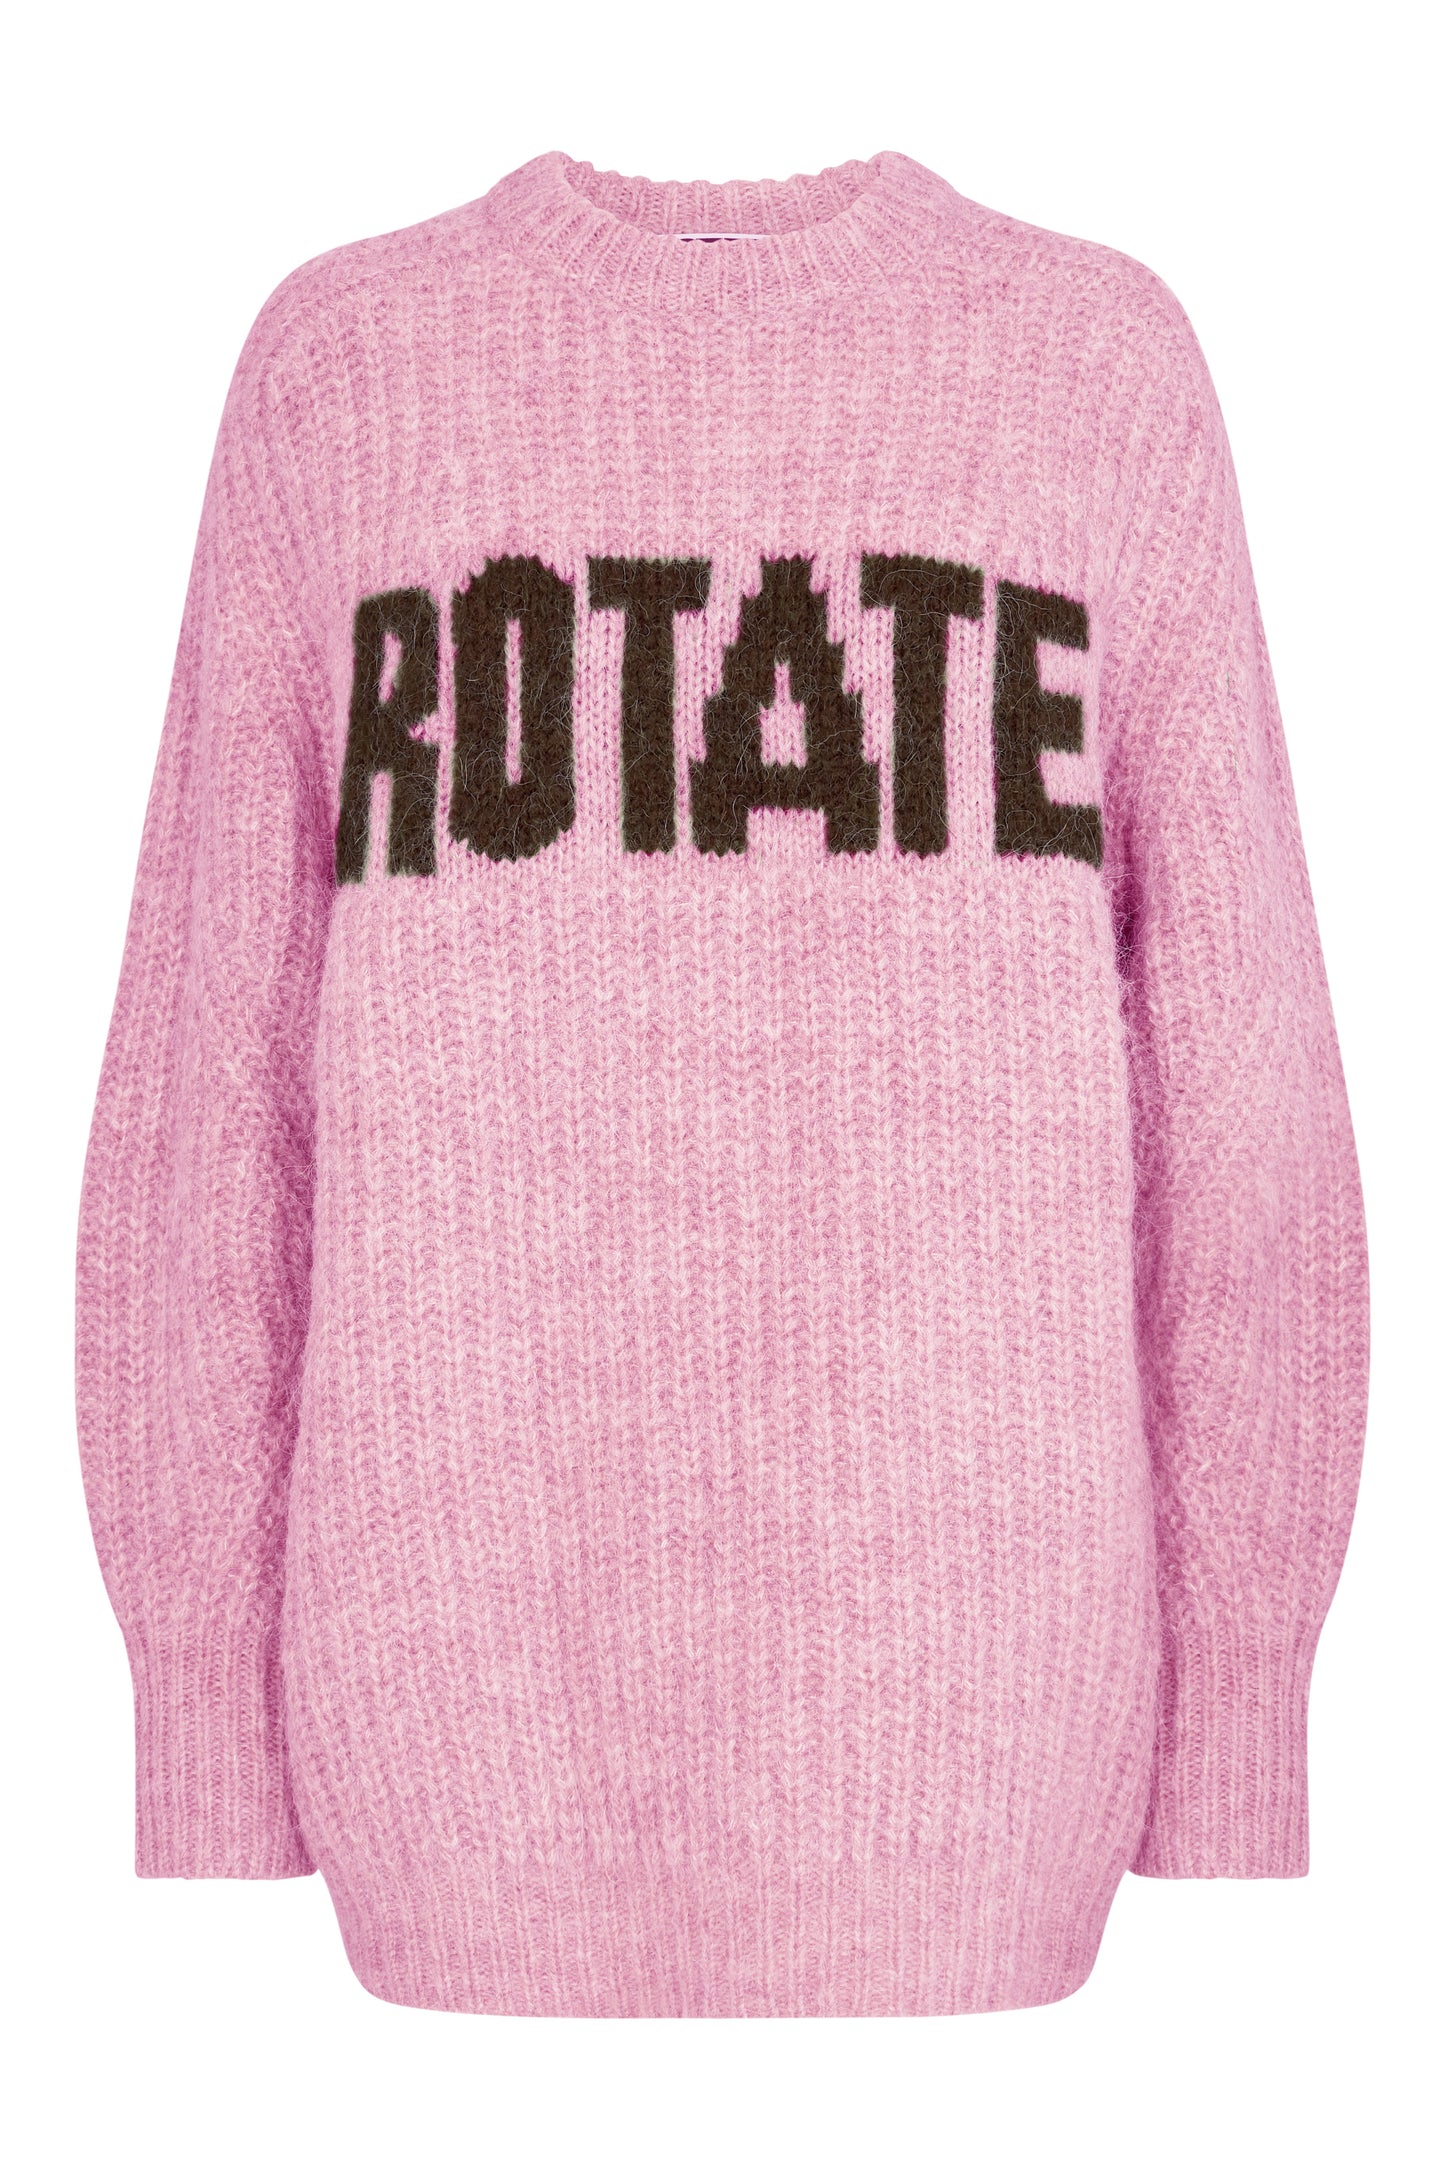 Rotate Oversized Knit Jumper